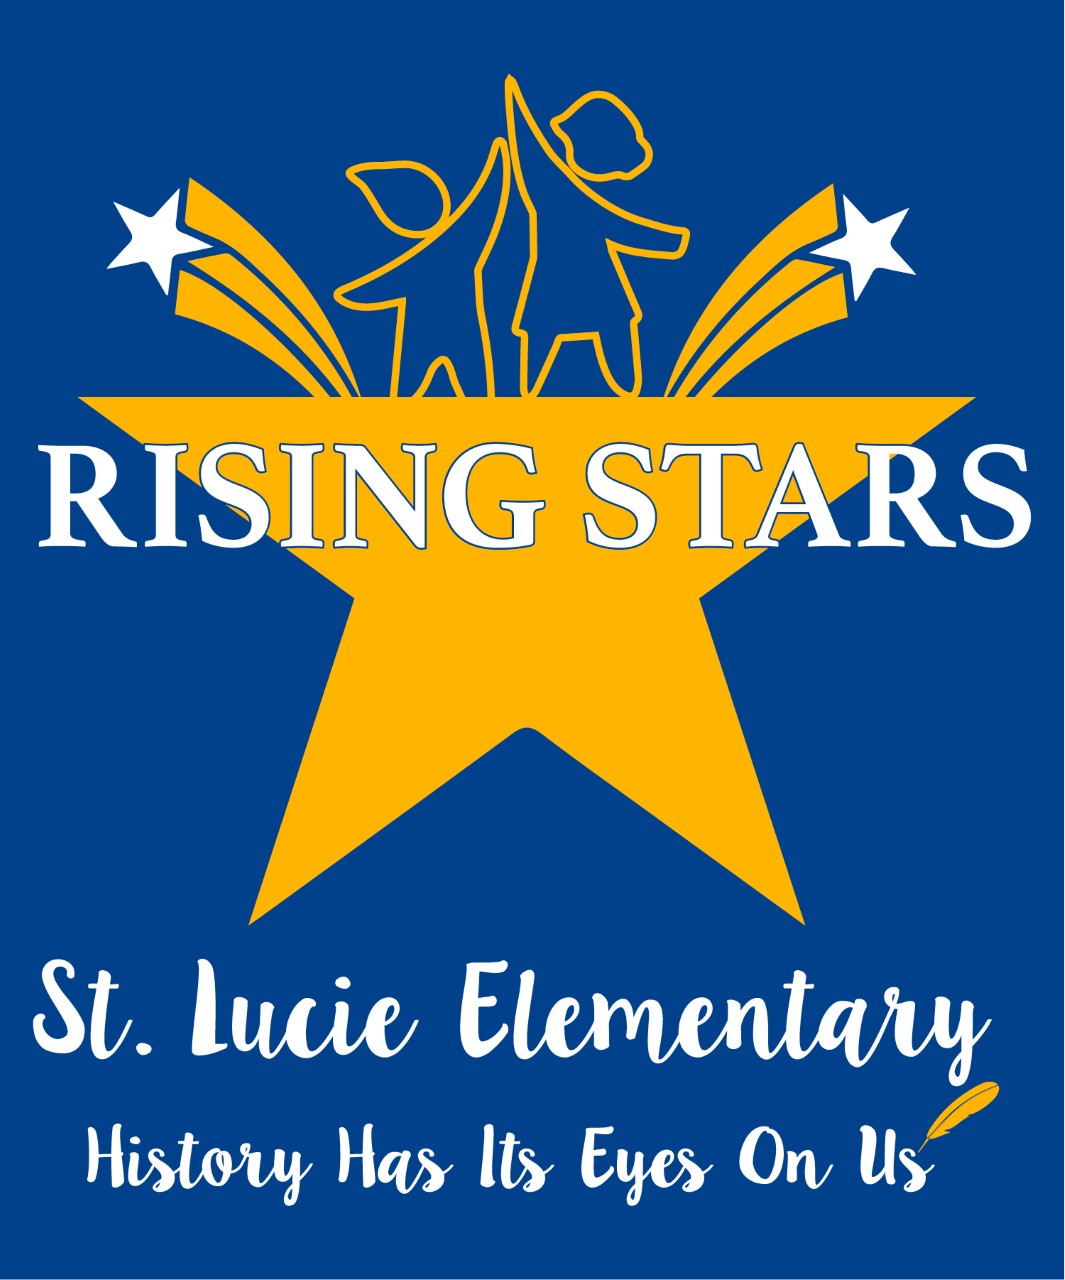 St. Lucie Elementary